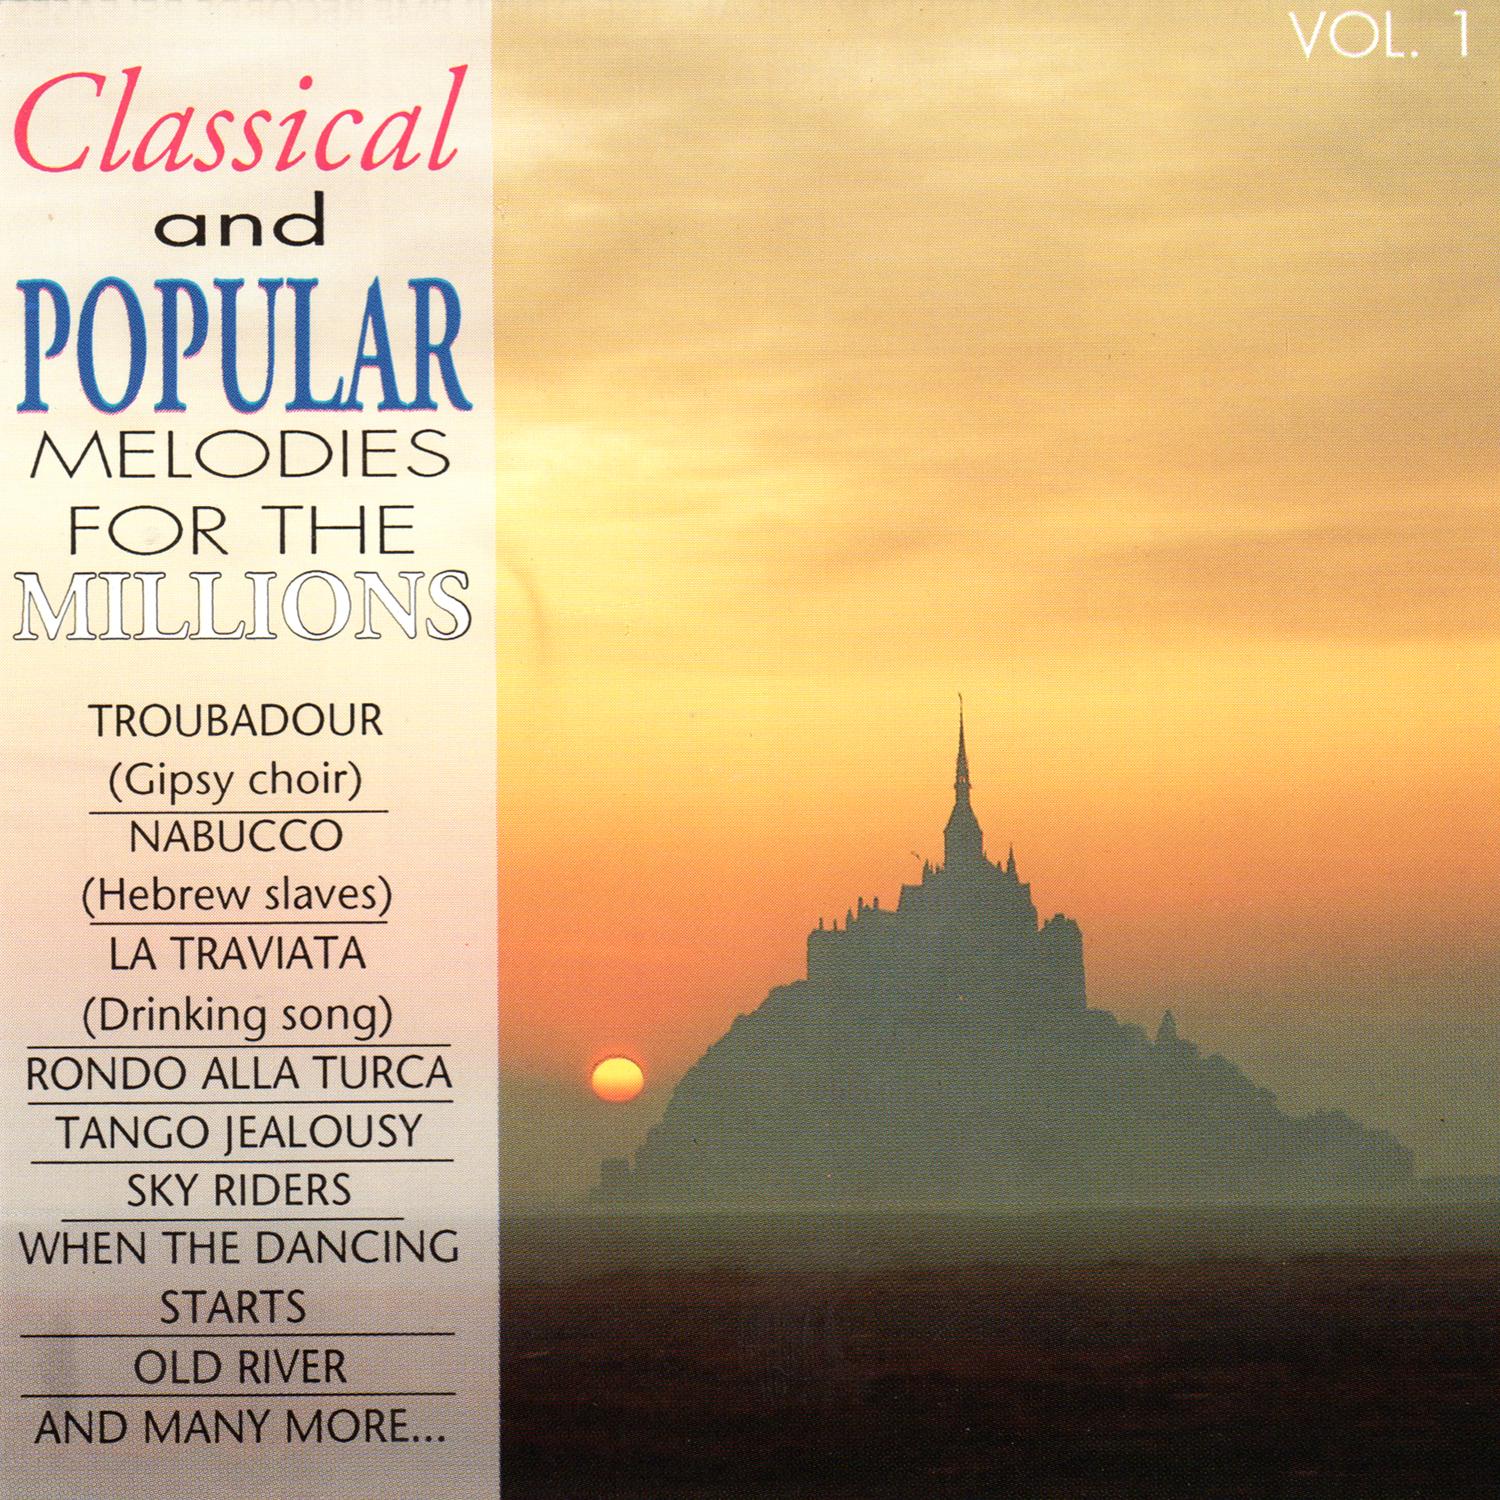 Classical and Popular Melodies for the Millions Vol. 1